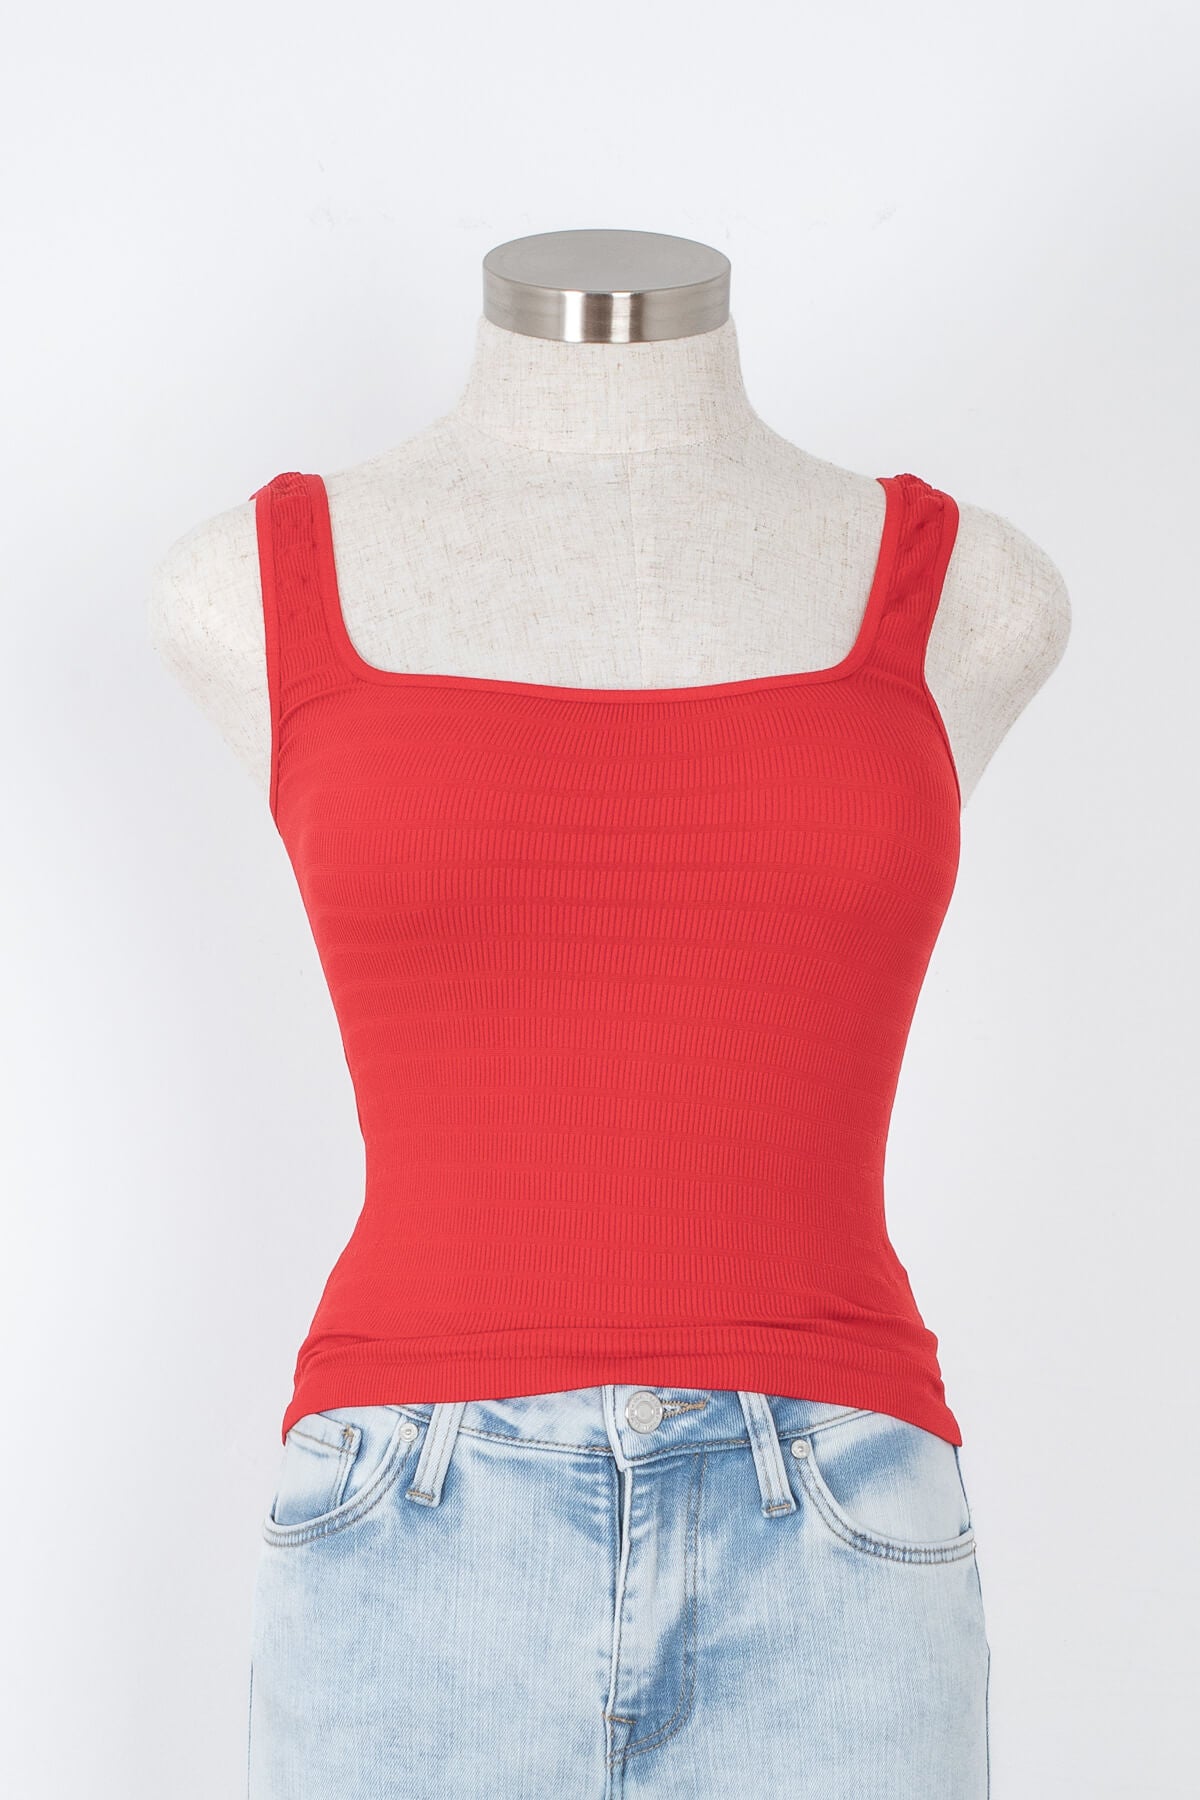 fitted red cami for women